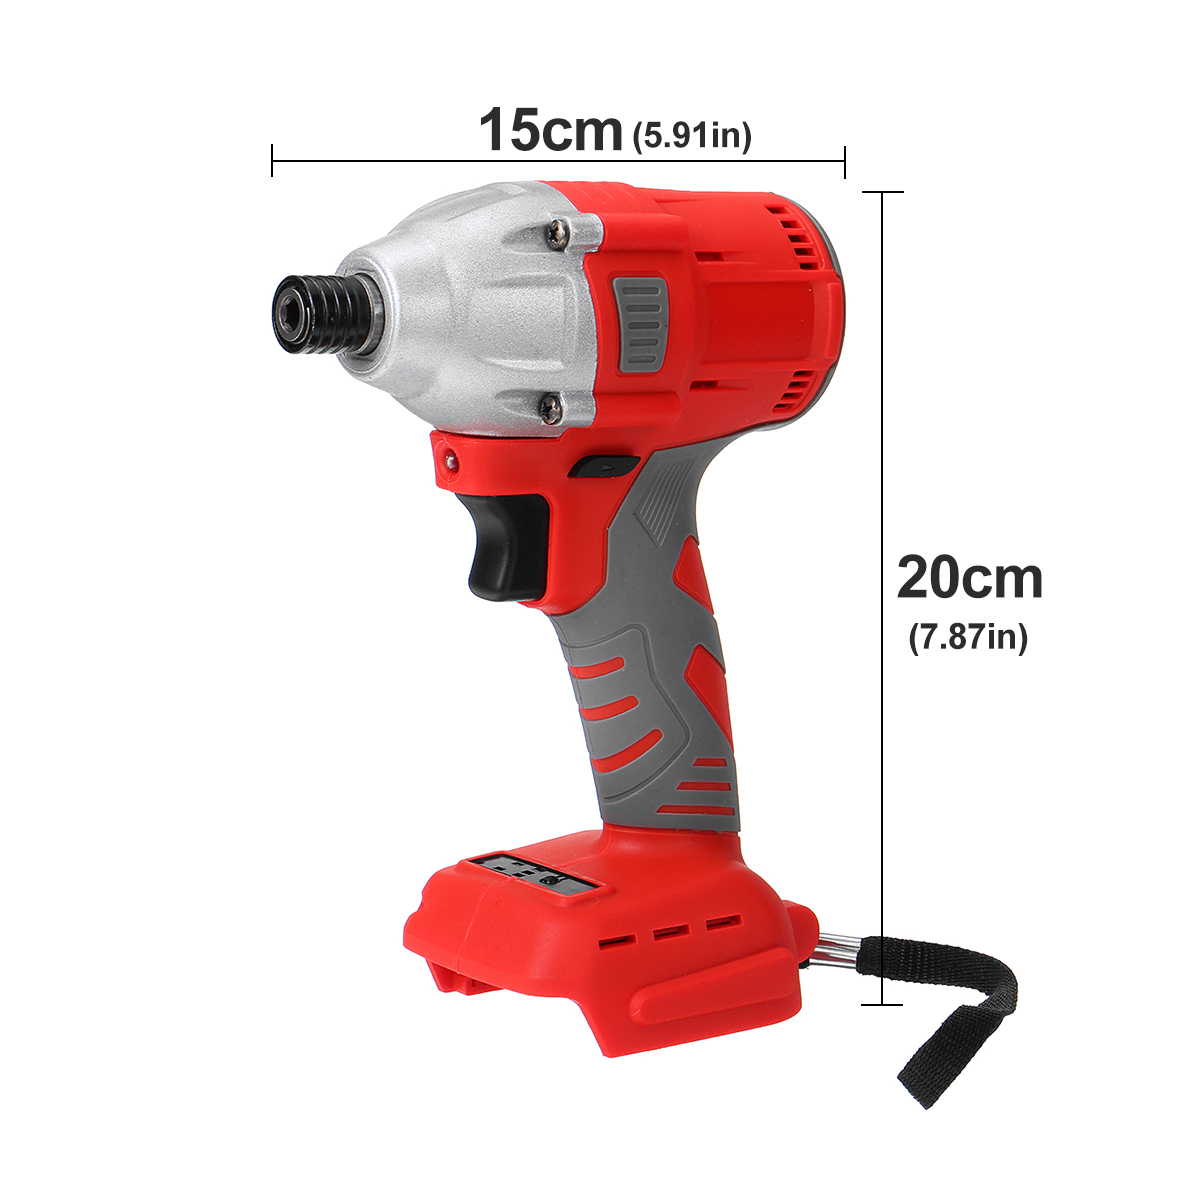 800NM-Brushless-Torque-Wrench-Electric-Screwdriver-Wrench-Cordless-Rechargable-Screw-Driver-Wrench-P-1843516-8